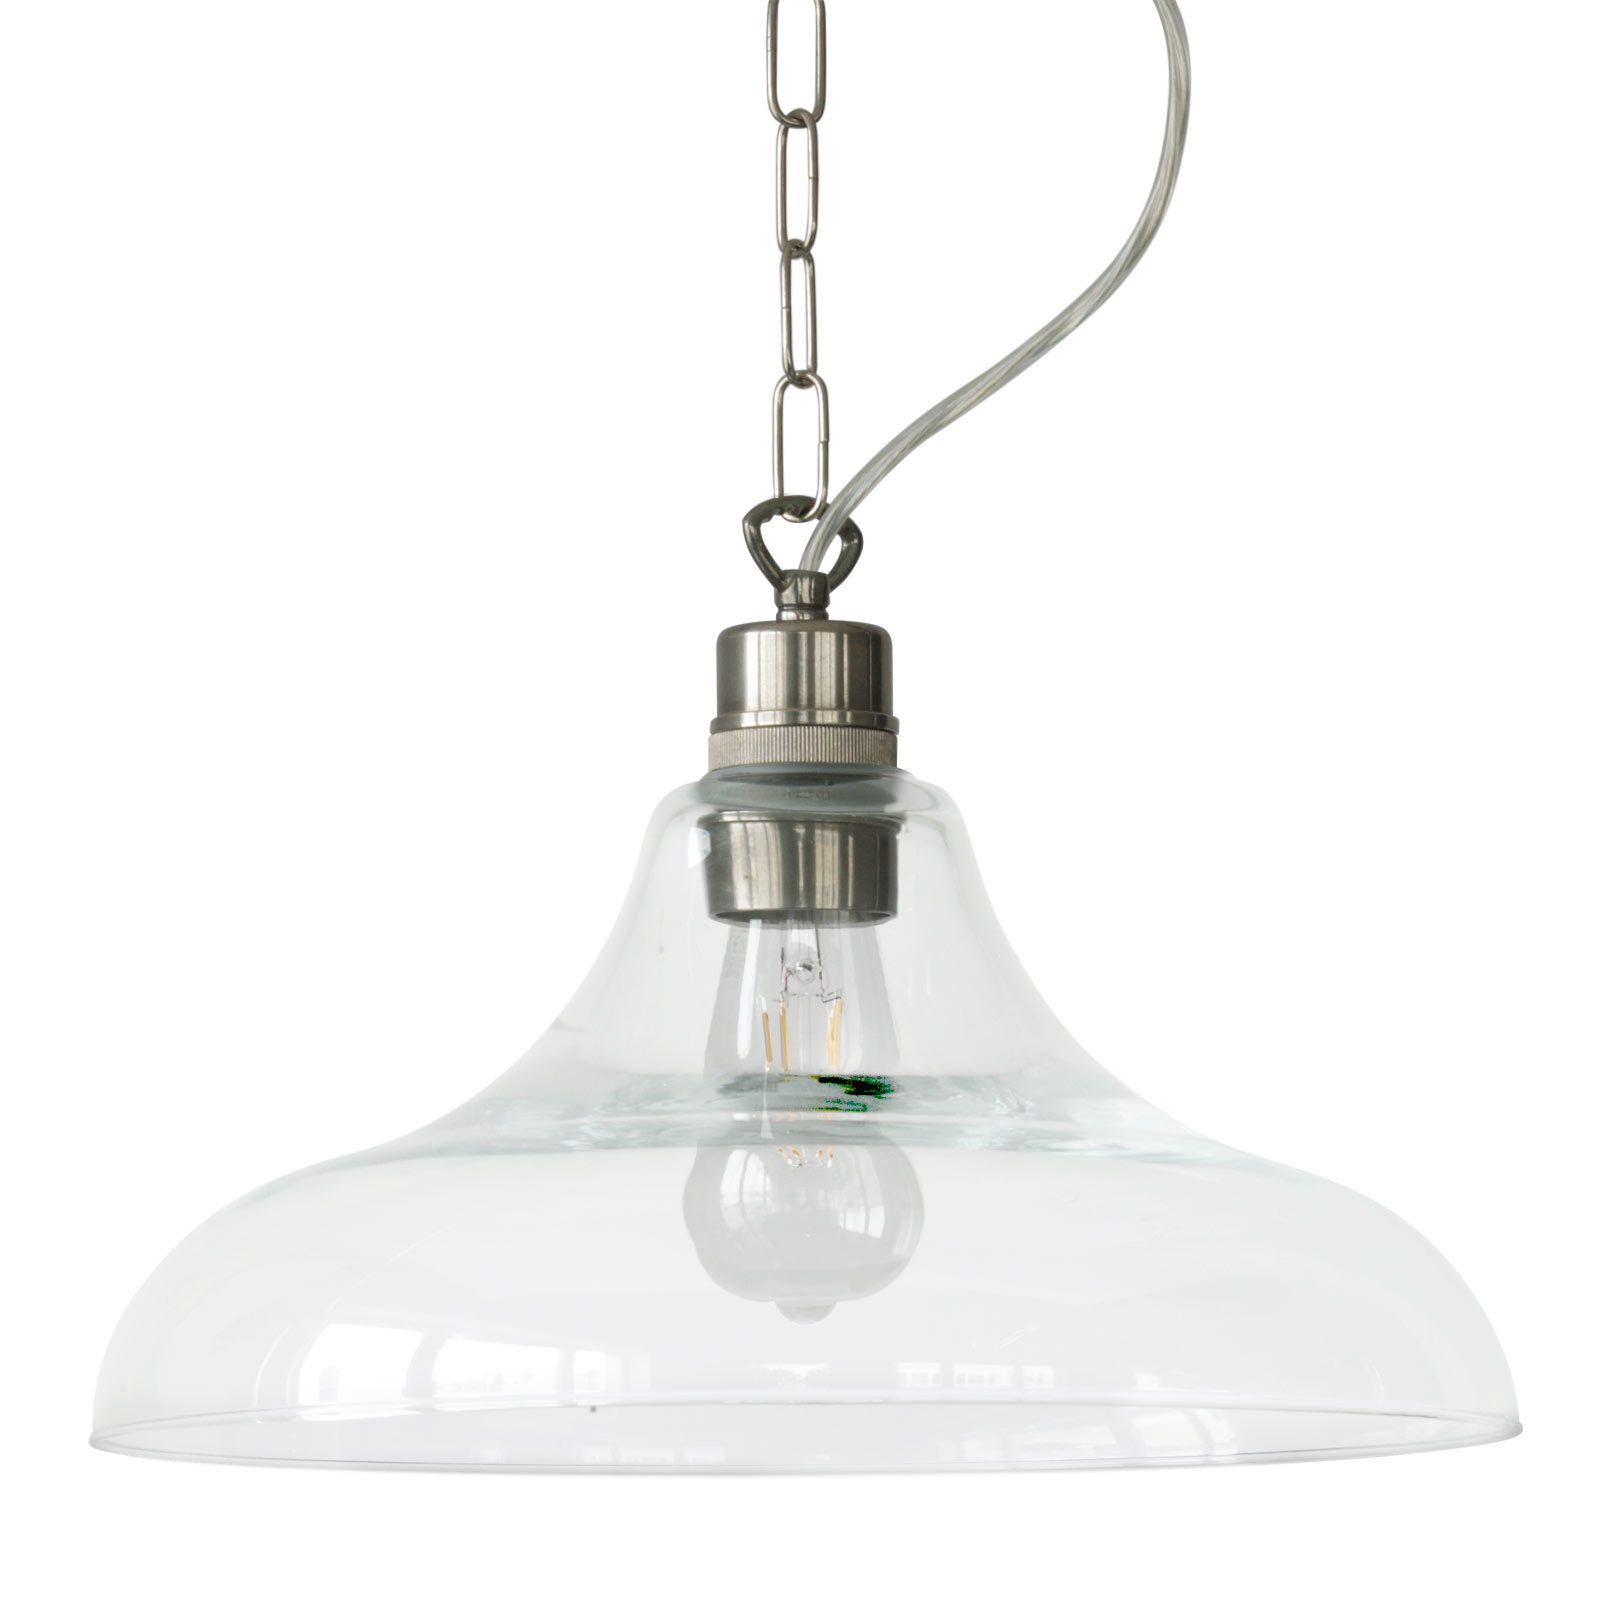 Pendant light with clear glass shade Ø 37 cm